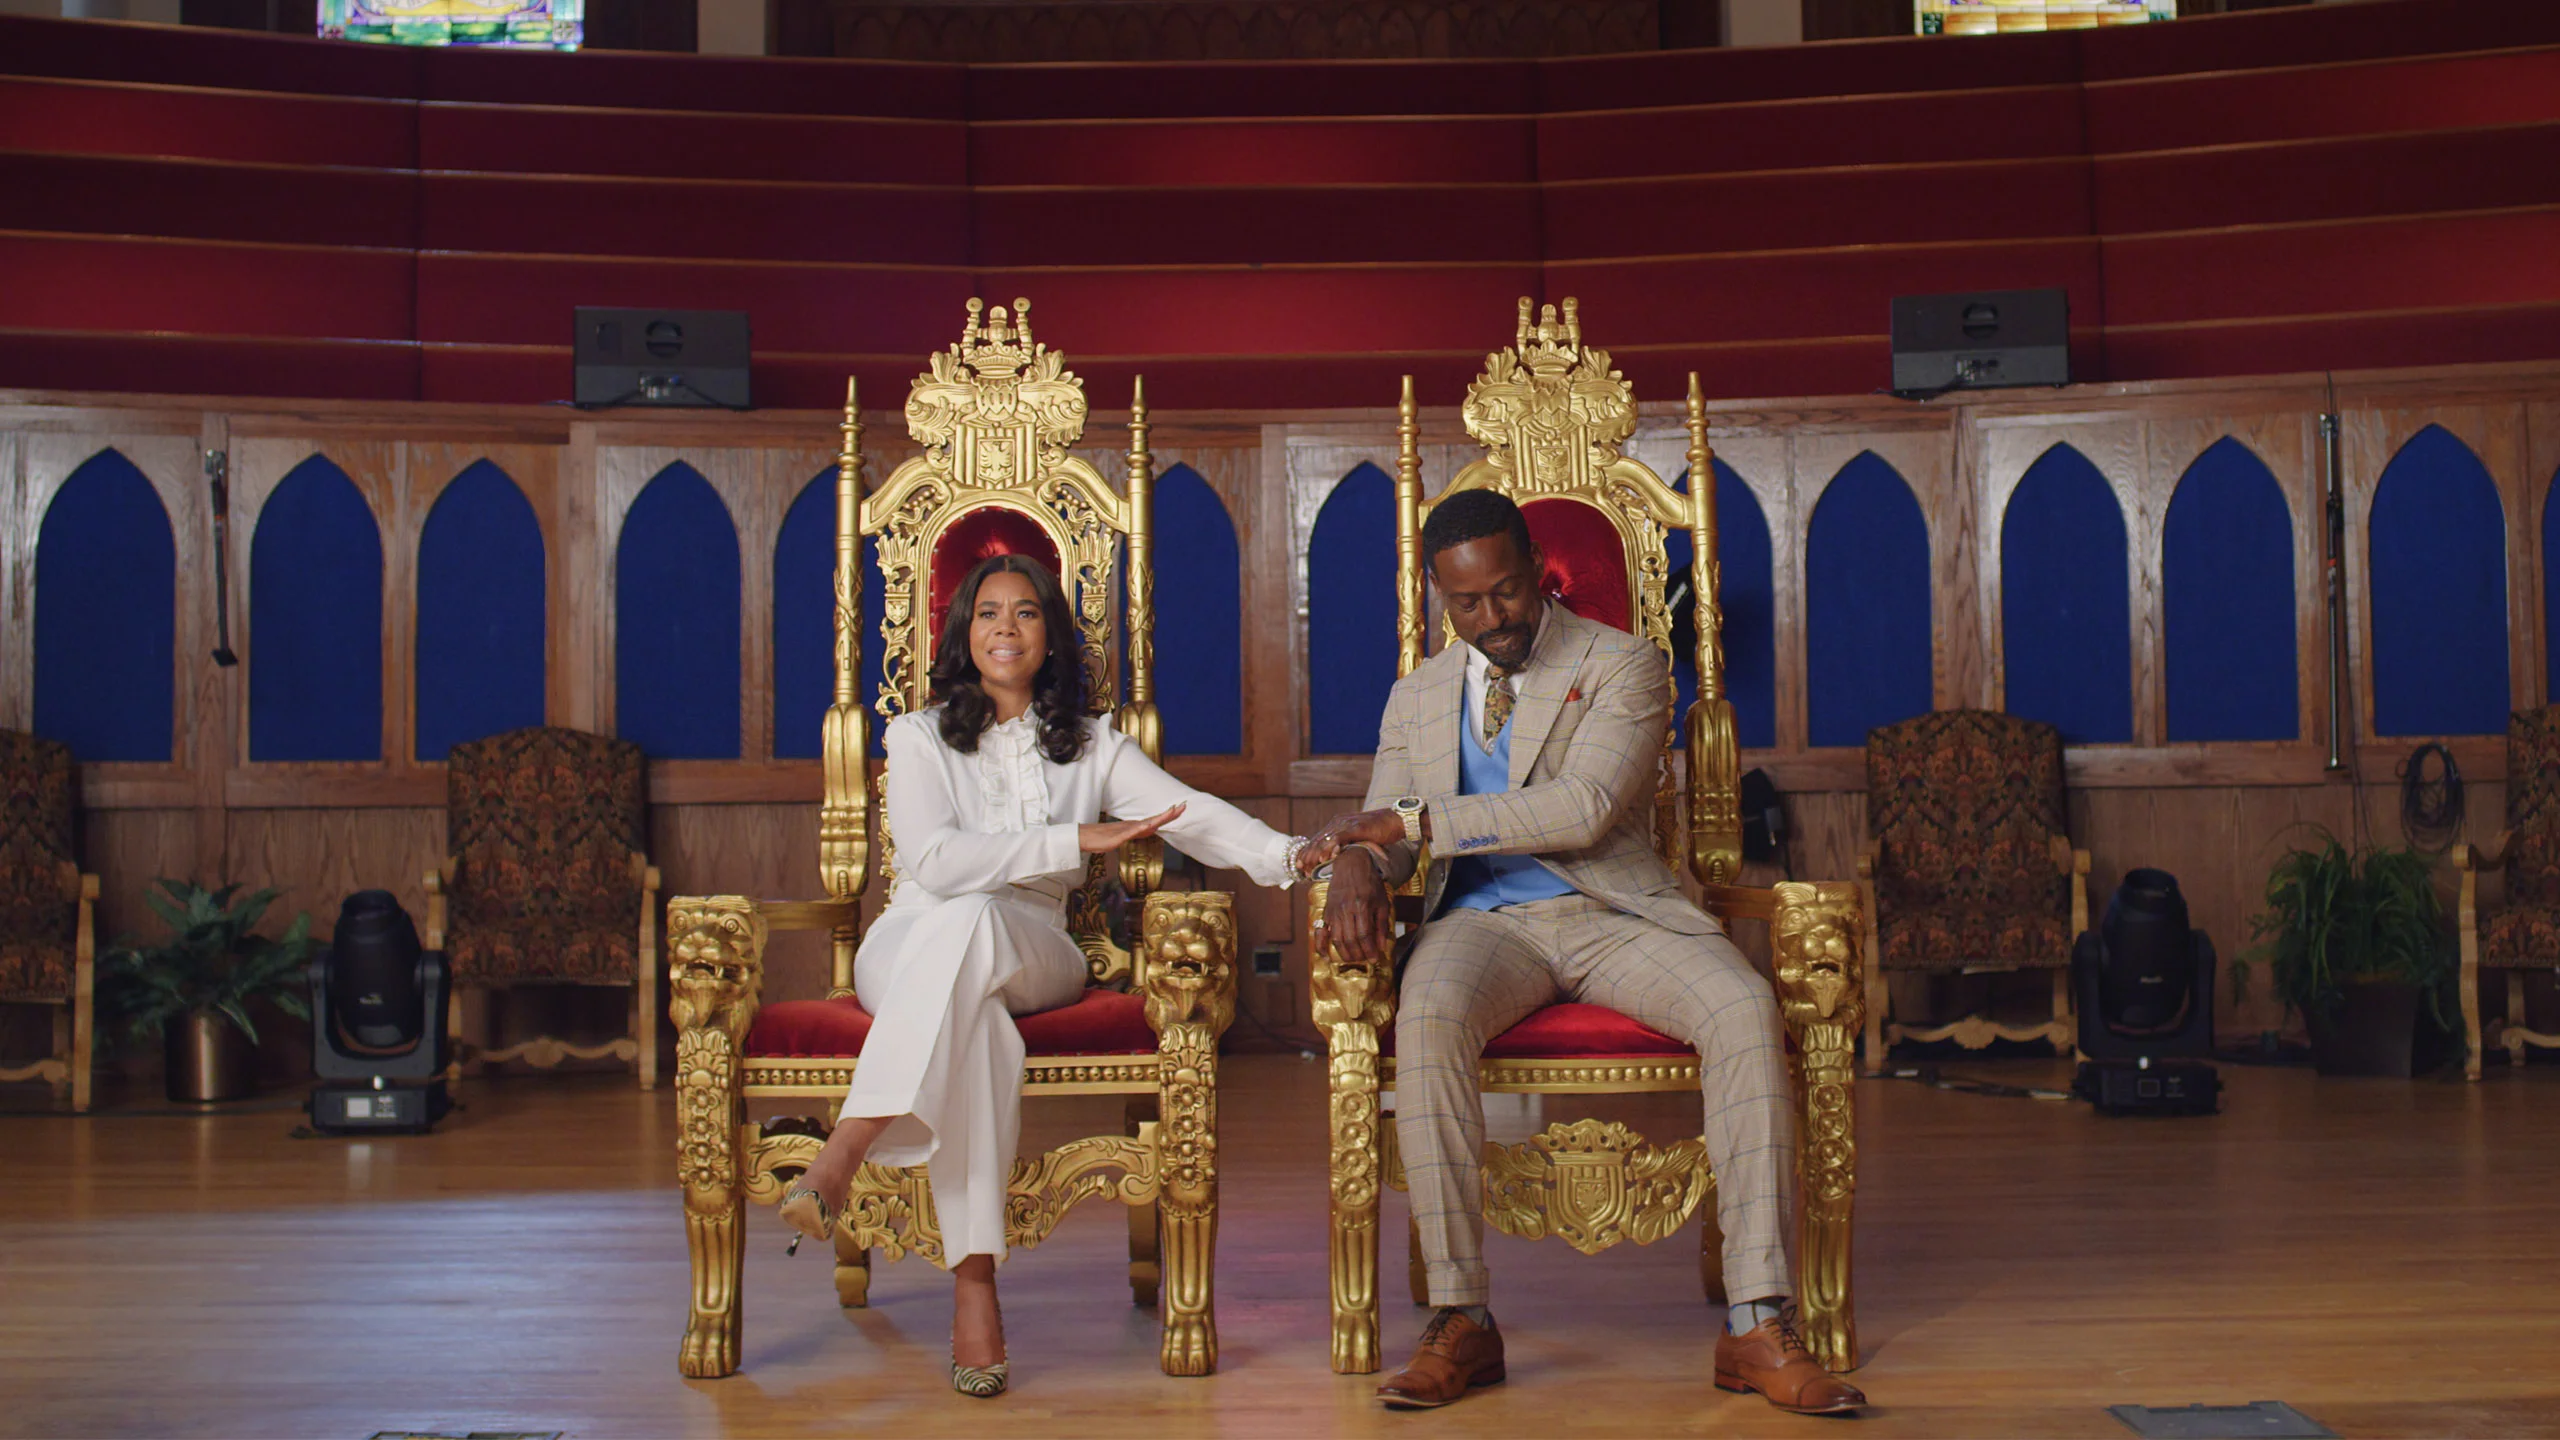 Trinitie Childs (Regina Hall) and Lee-Curtis Childs (Sterling K. Brown) on their thrones